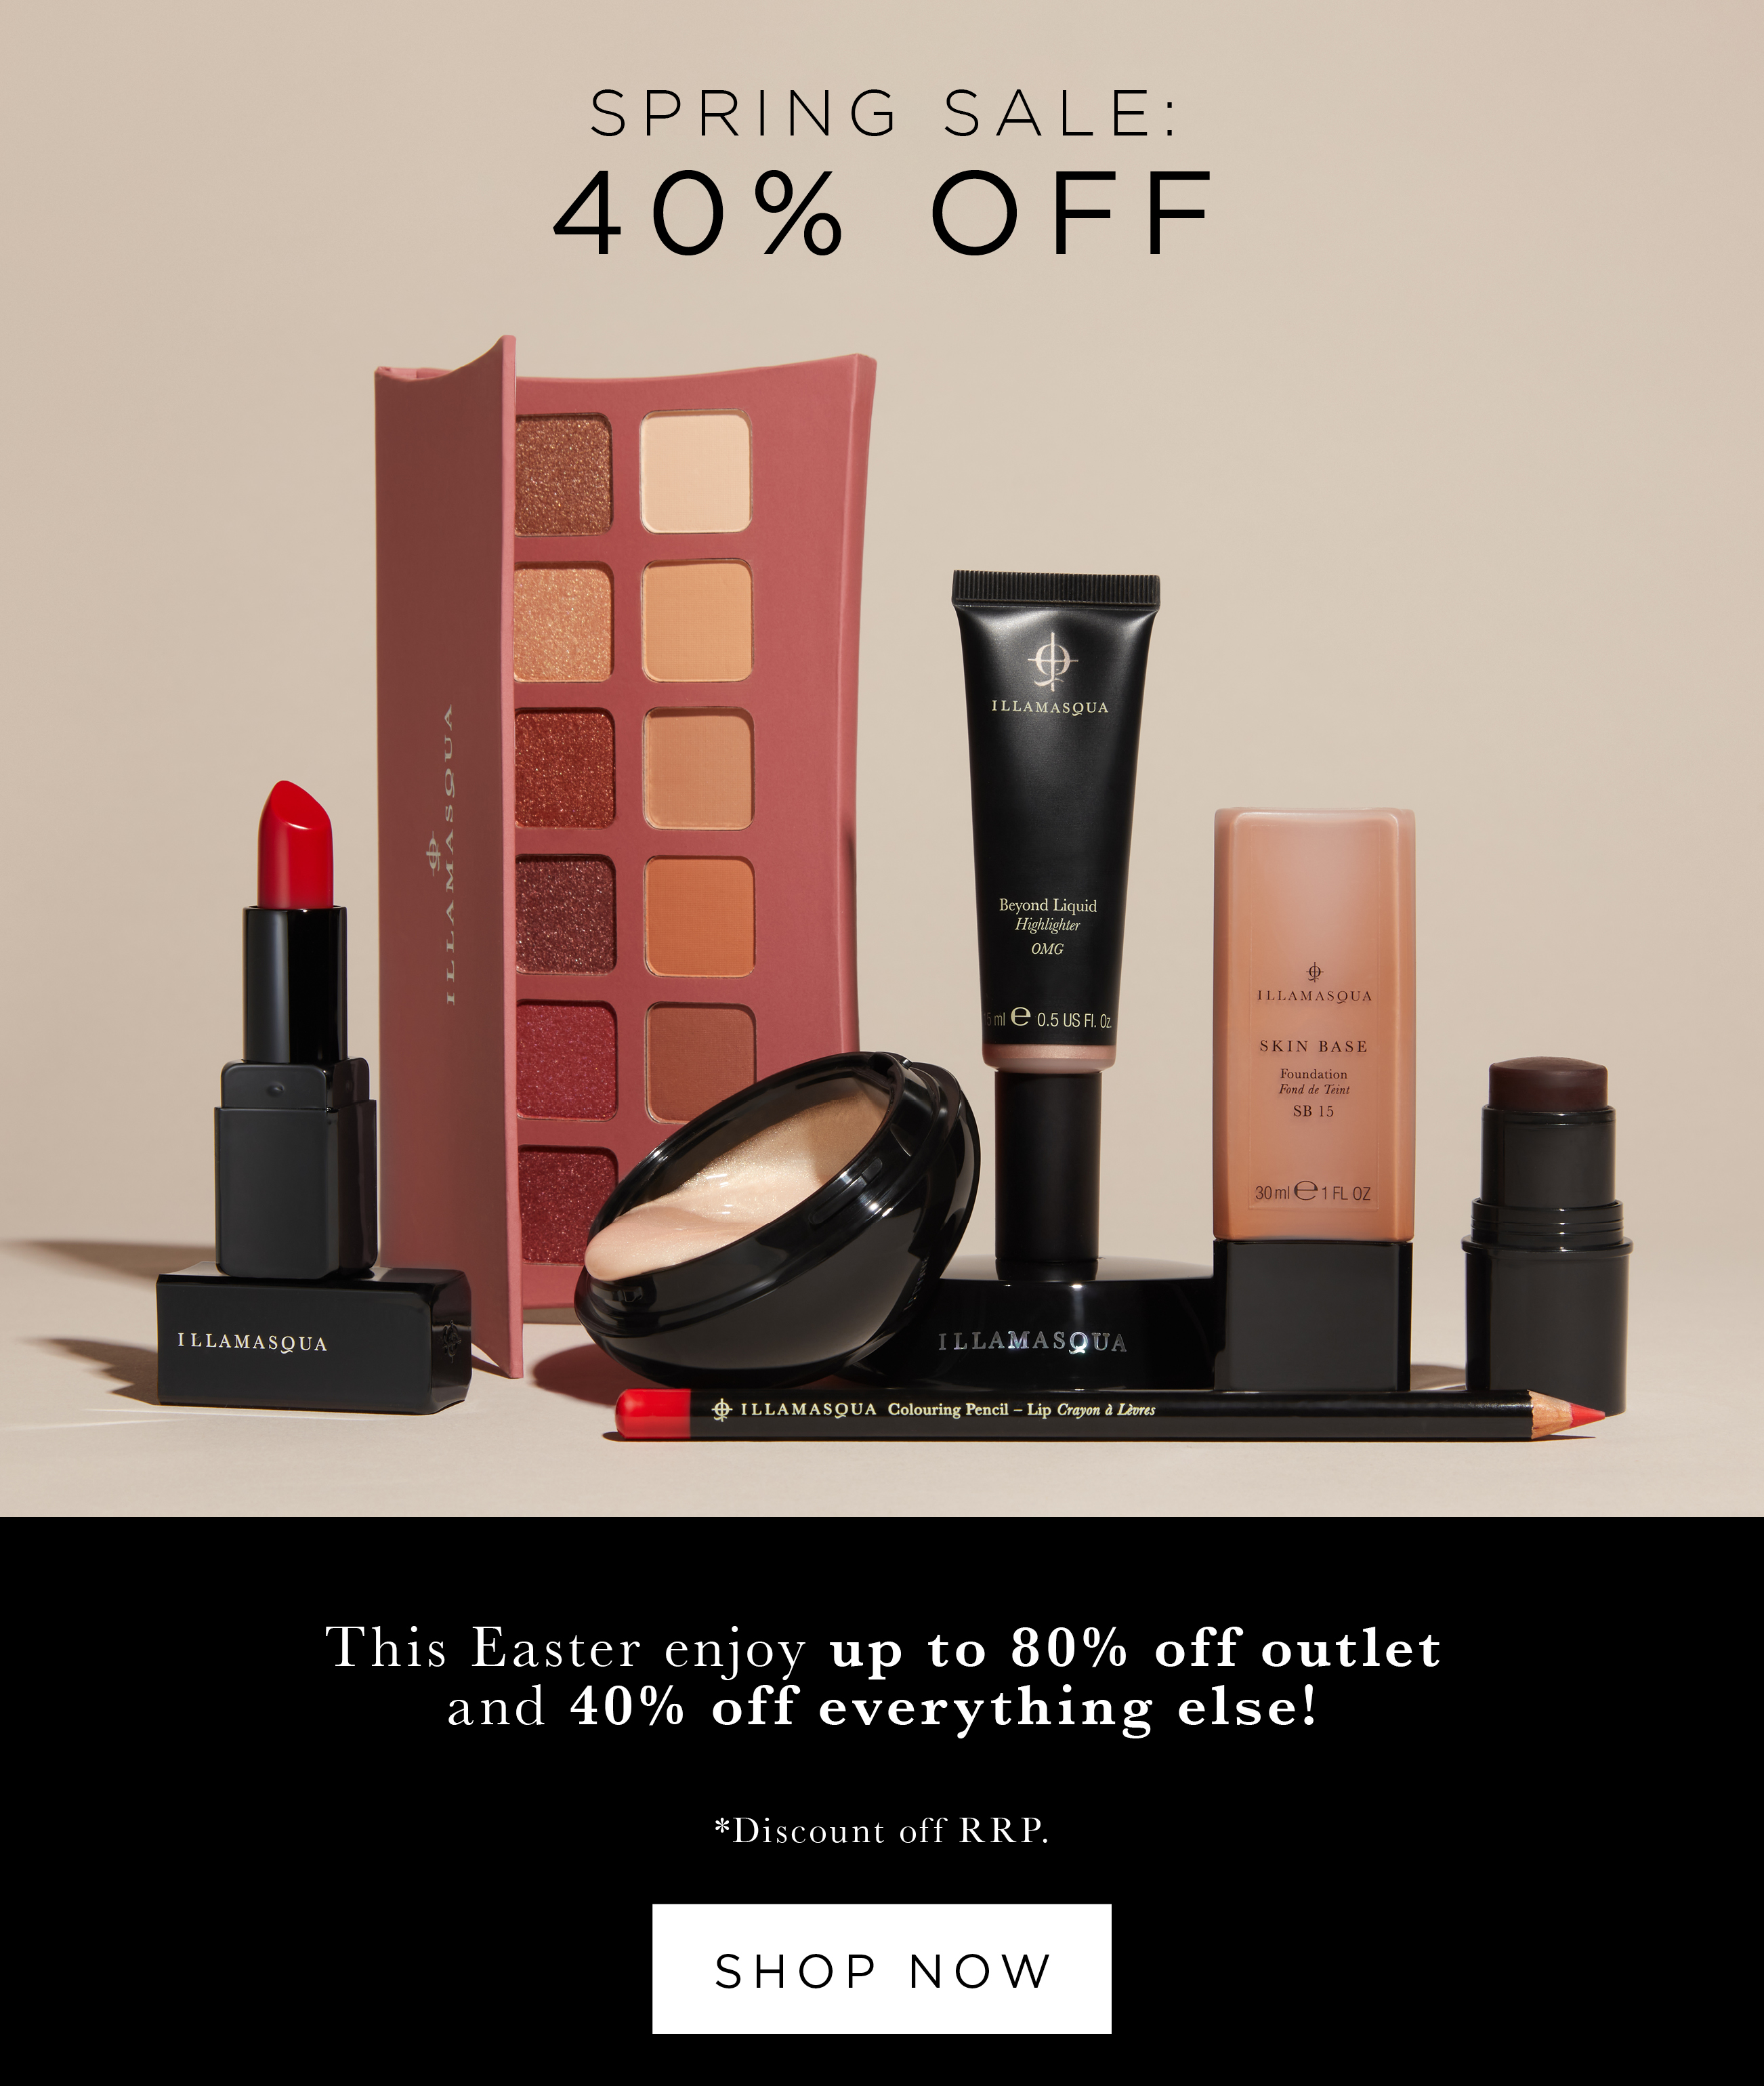 40 percent off bestsellers and up to 80 percent off outlet